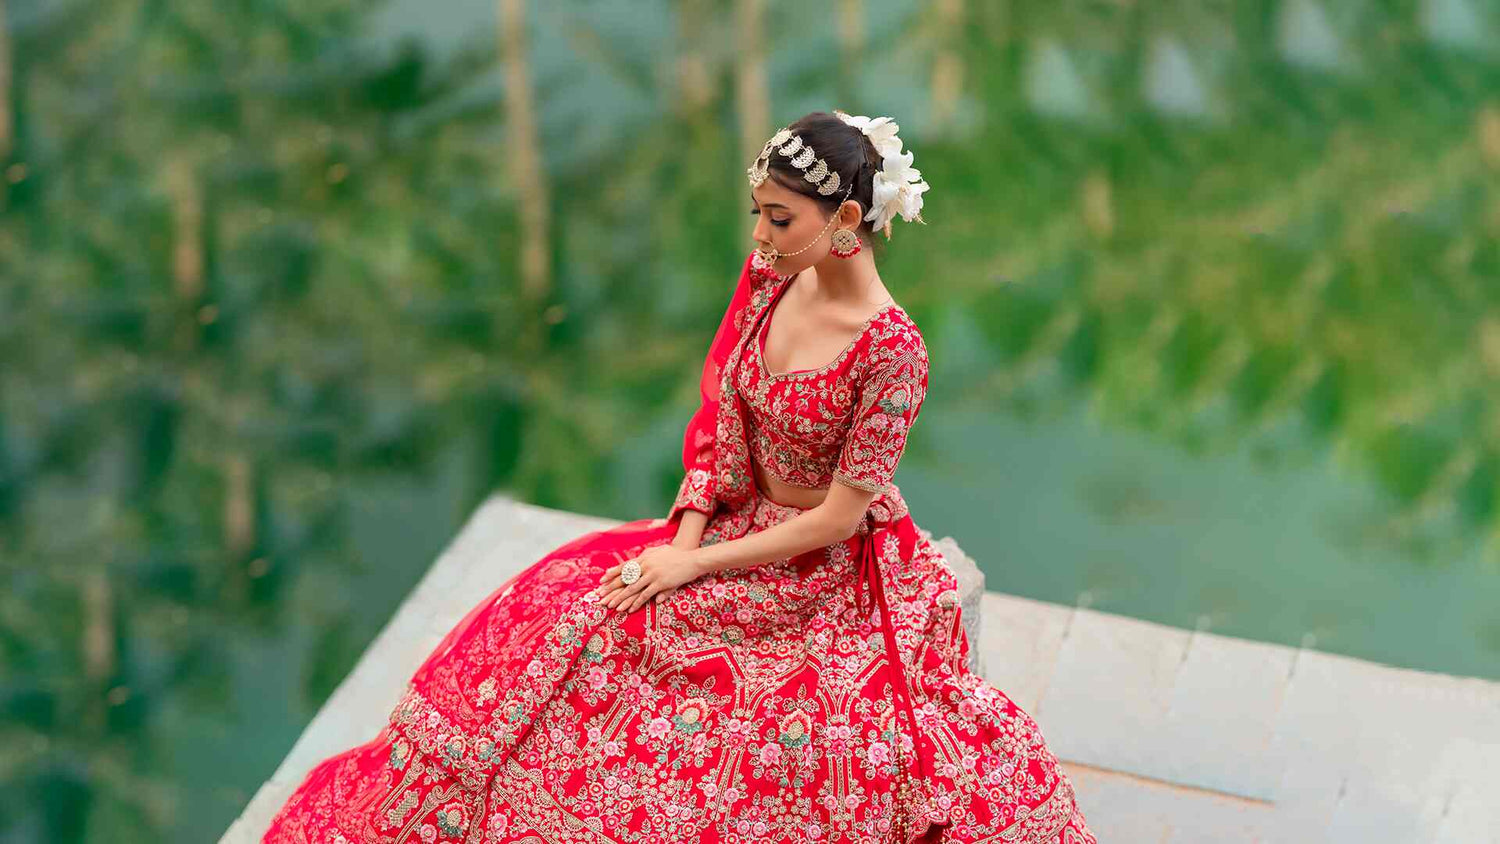 Cover Image for Designer Khushboo Baheti's wesbite featuring a Red Hot Pink Indian Bridal Ethnic Lehenga Set Embroidered with Zardozi and Threadwork using hand embroidery technique.